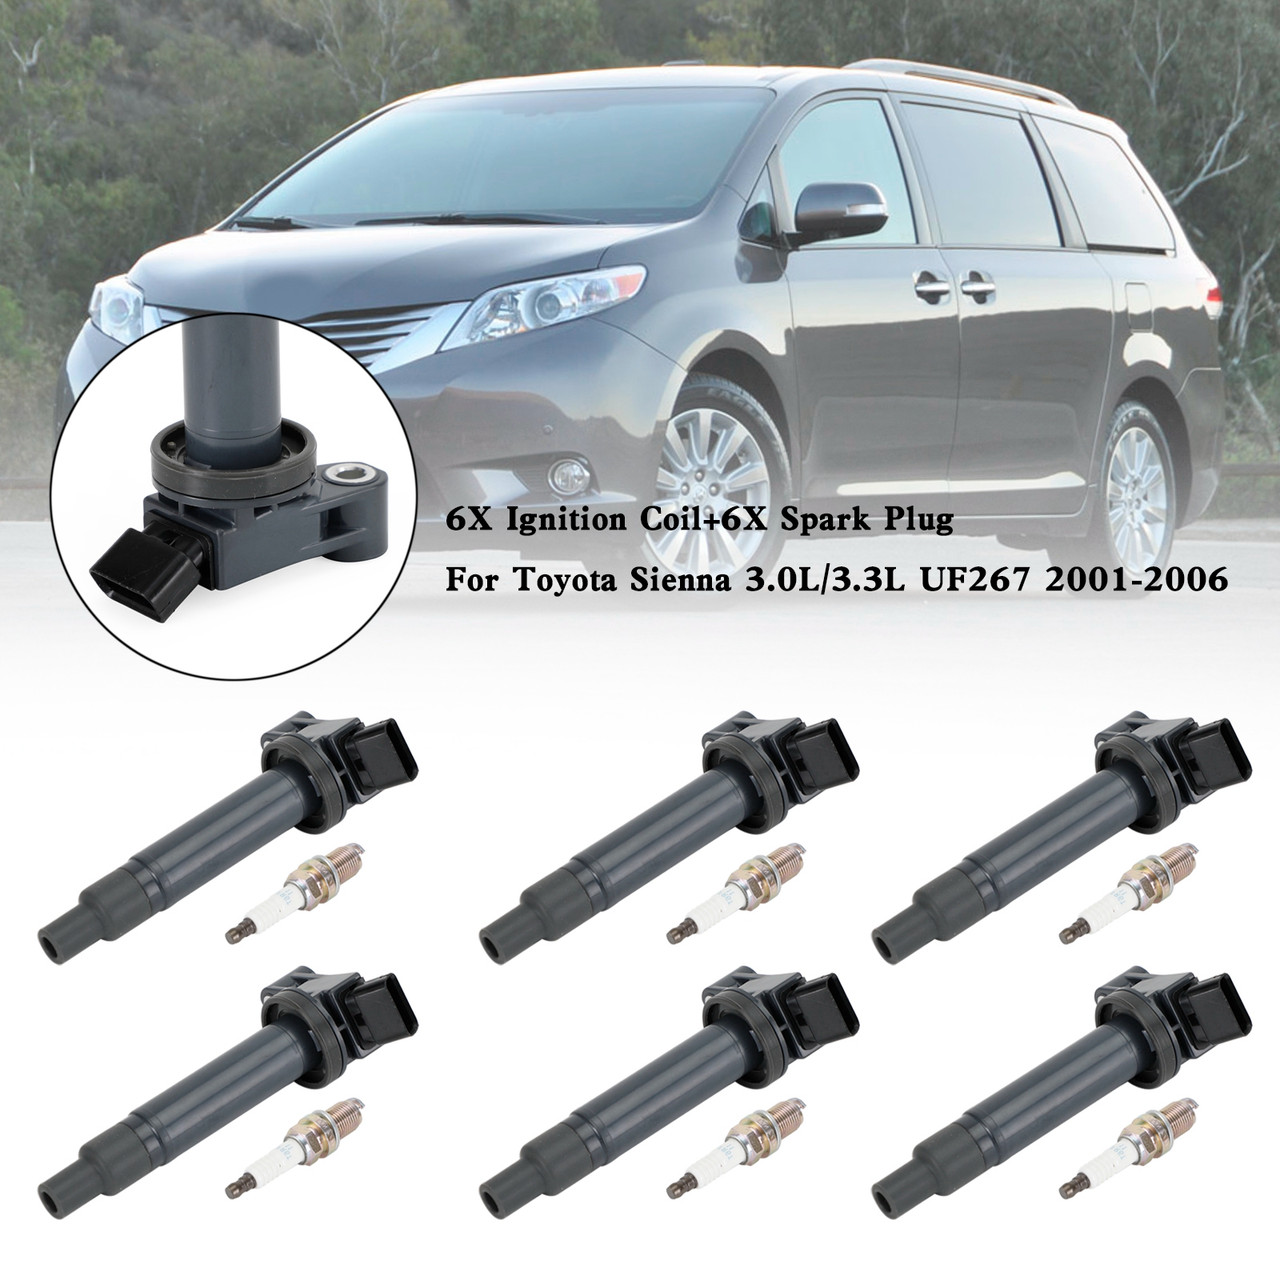 6X Ignition Coil+6X Spark Plug For Toyota Sienna 3.0L/3.3L UF267 2001-2006